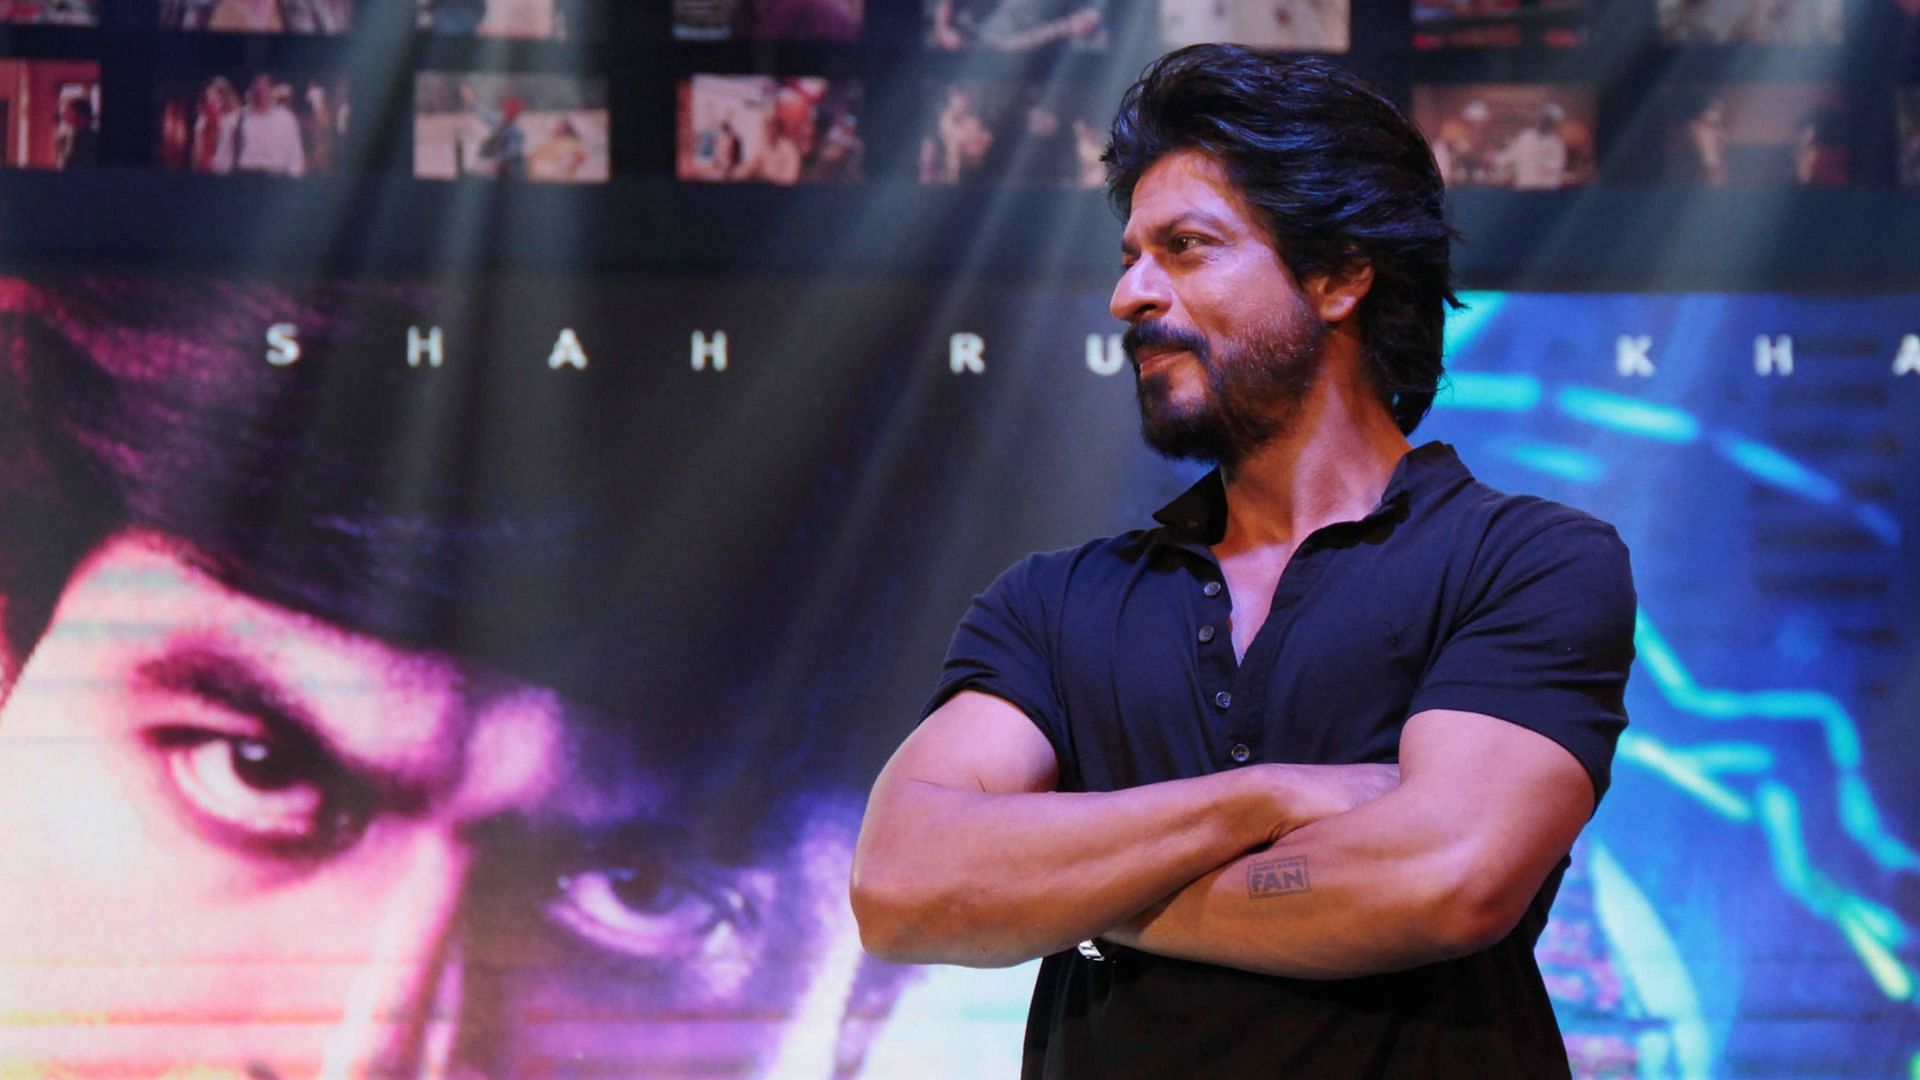 SRK promises to meet a disabled fan and his brother.